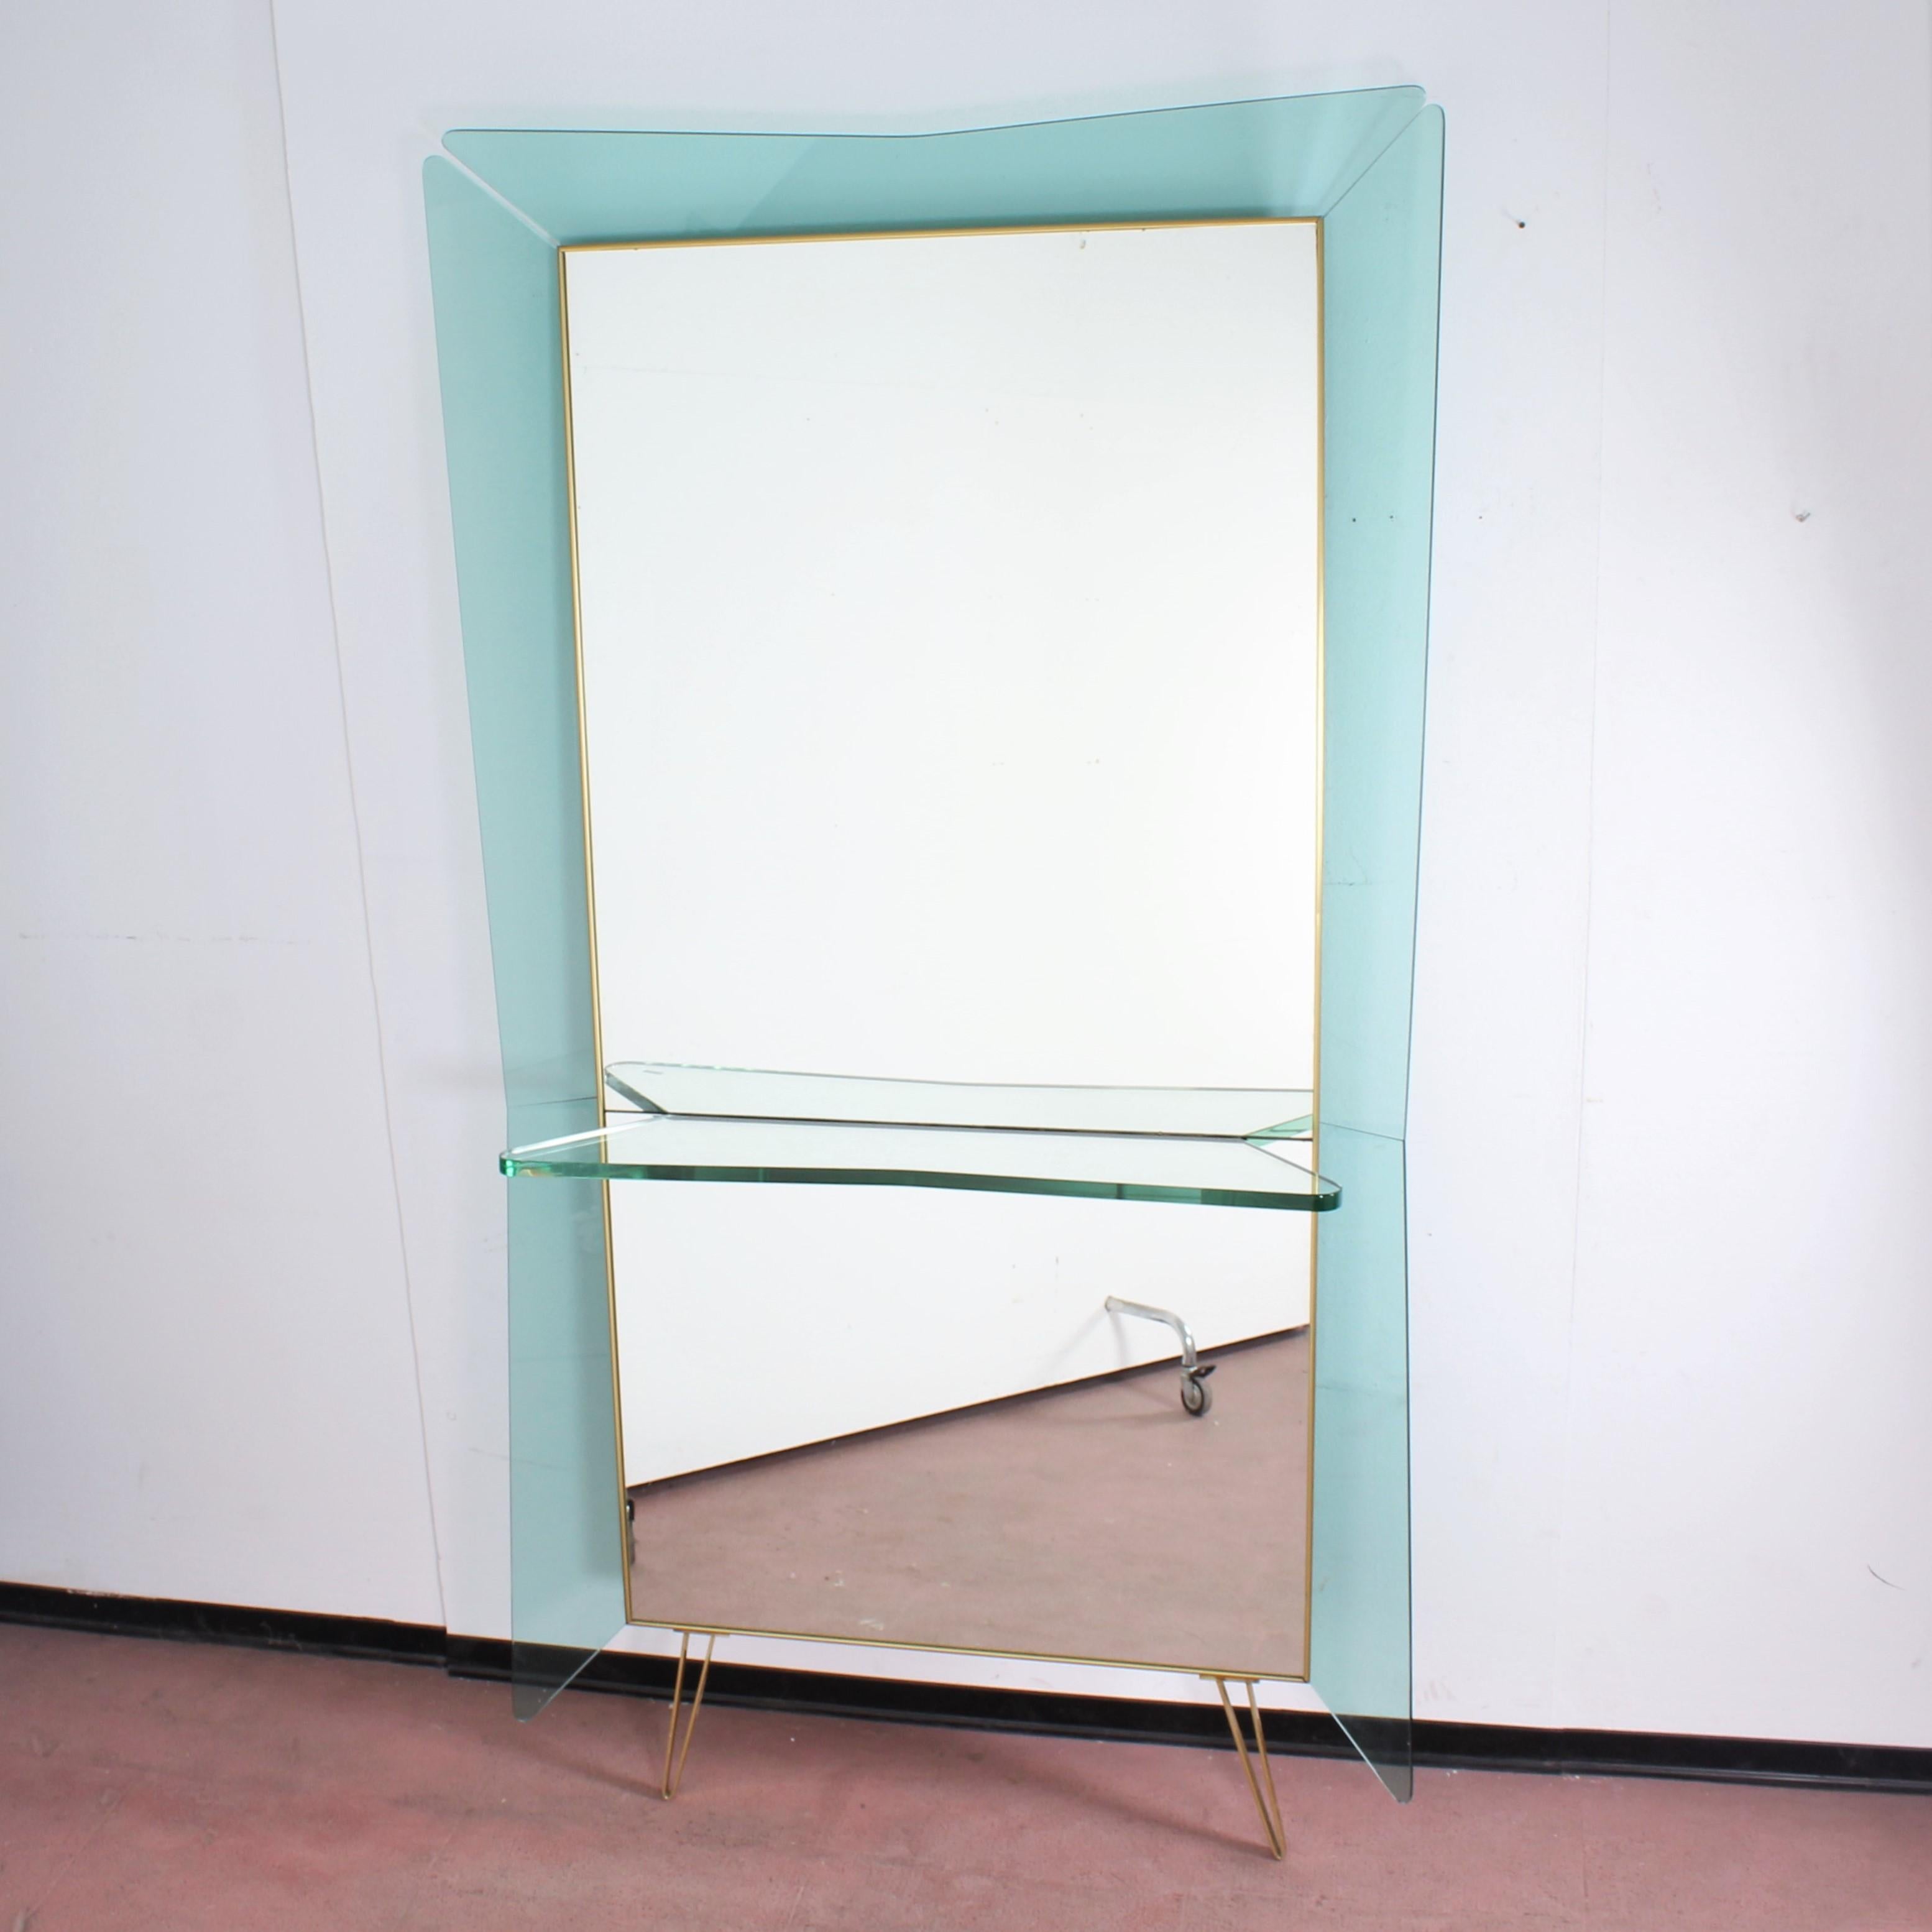 Majestic and very beautiful brass and wood console with a big mirror with large green curved glass frame and thick glass shelf. Mod. 2697 made by Cristal Art Torino, 1940s, Italy.

Good condition, wear consistent with age and use.